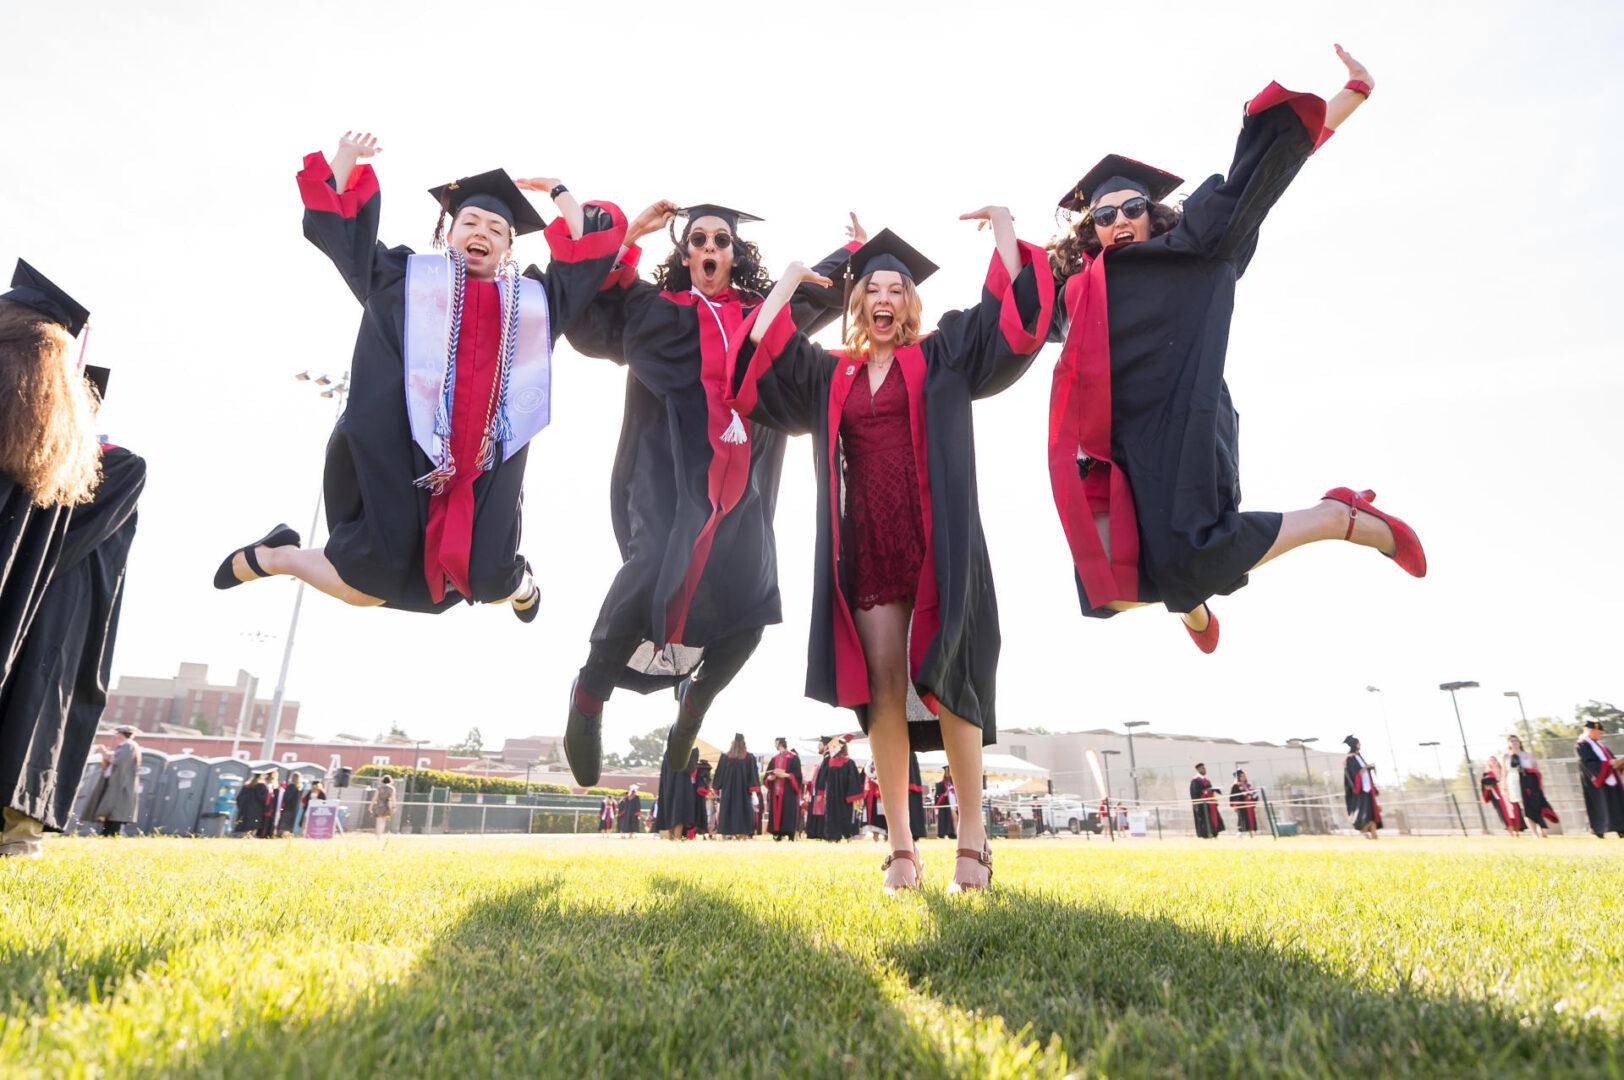 Four students wearing caps and gowns jump in unison celebrating their college graduation